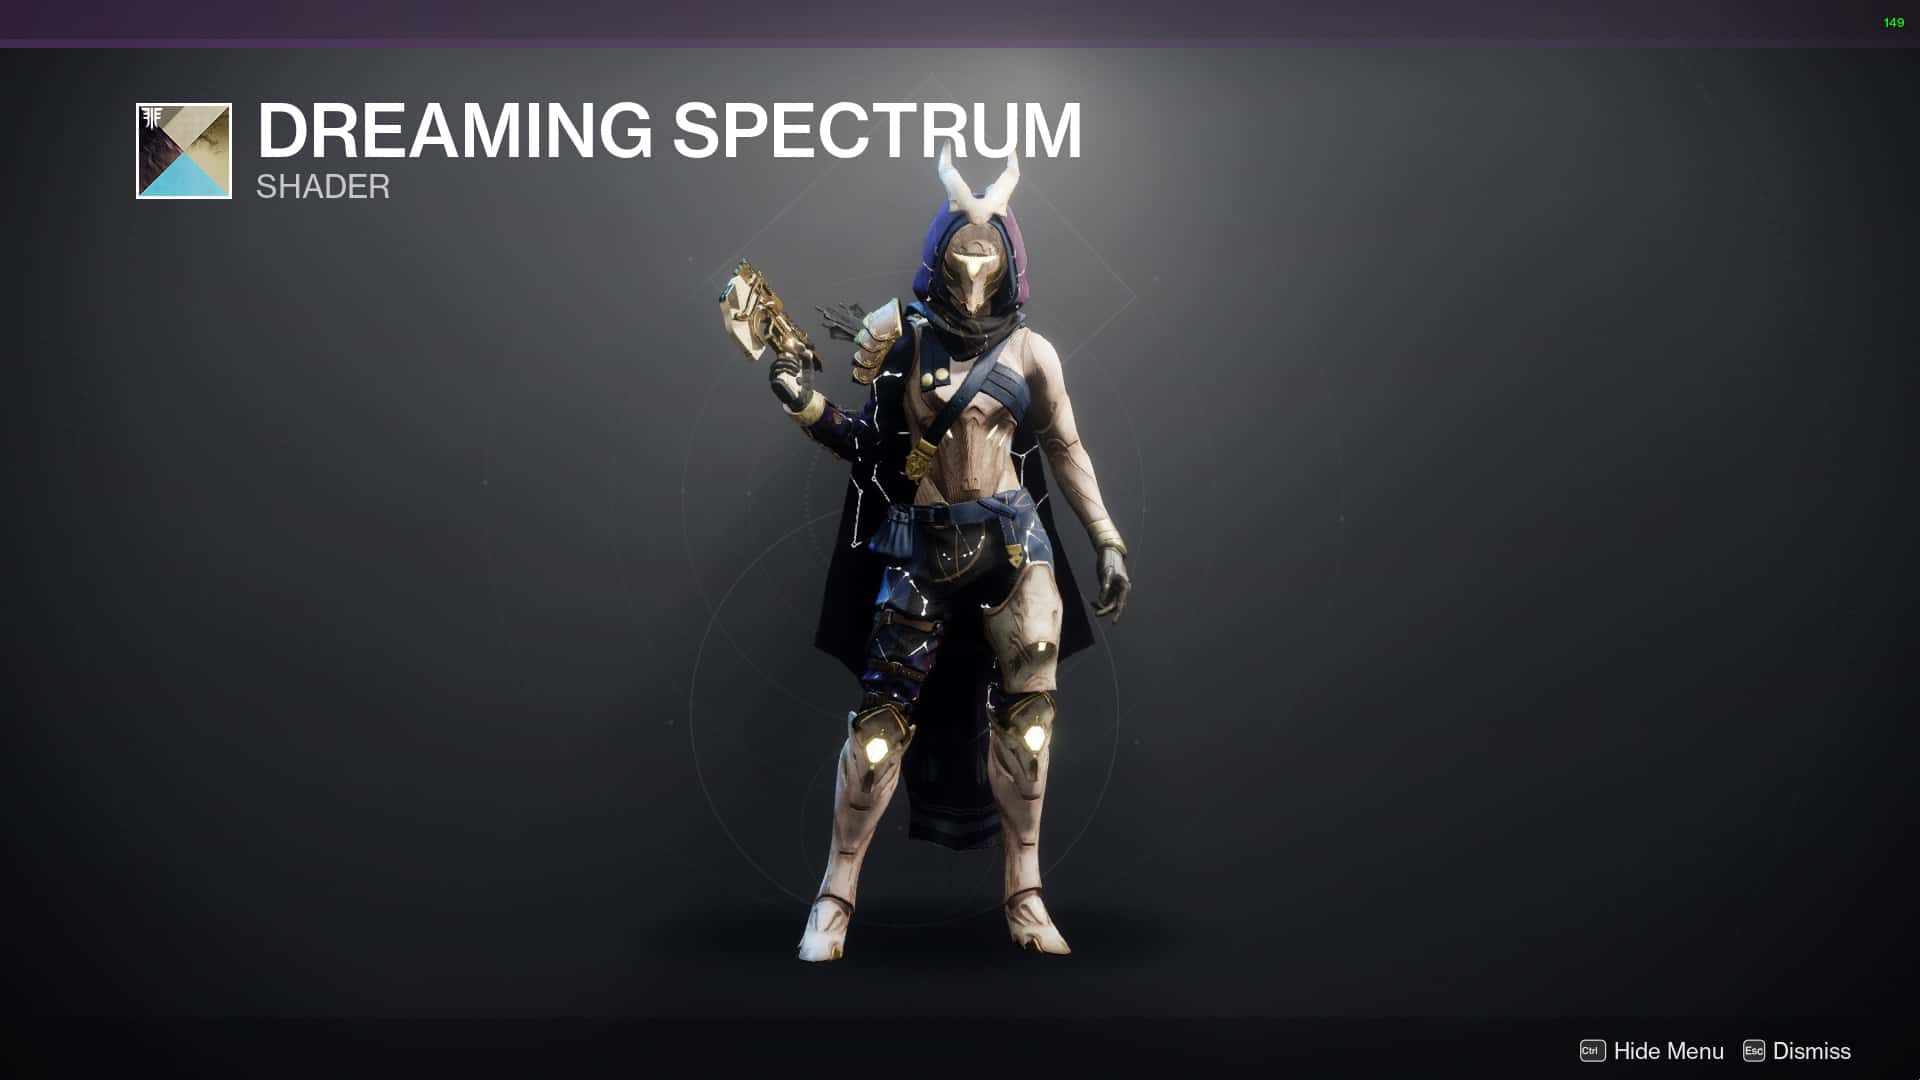 Dreaming Spectrum Shader featured Destiny 2